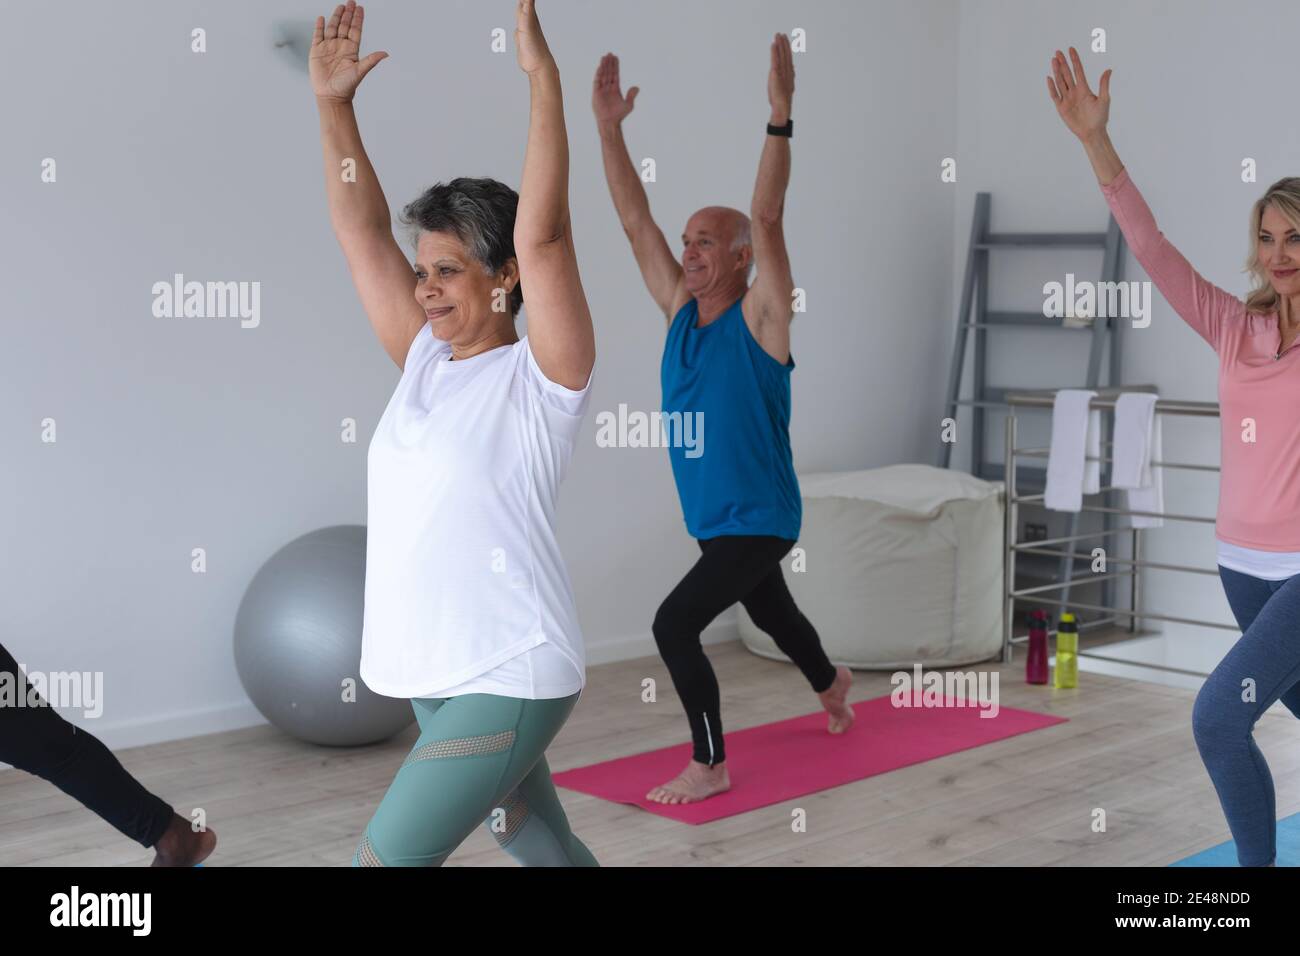 Diverse group of seniors taking part in fitness class at home Stock Photo